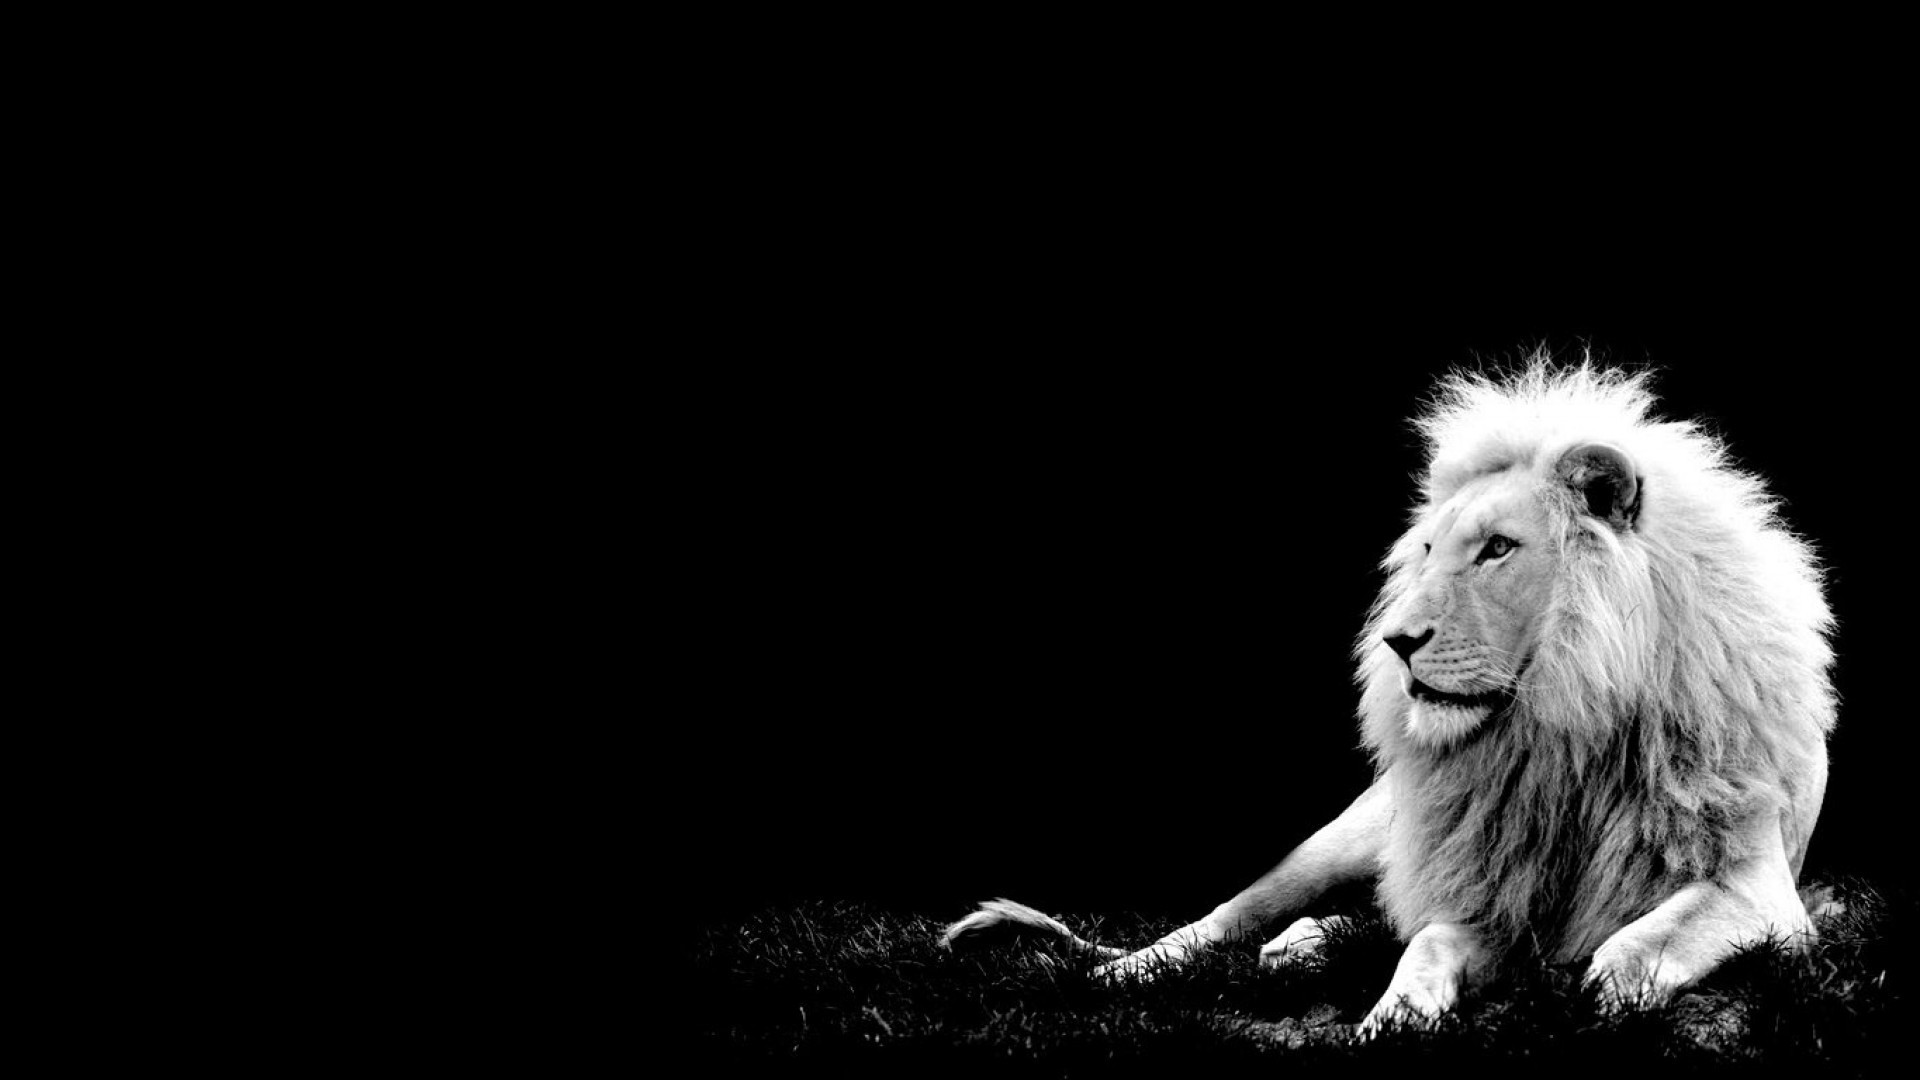 1920x1080 Lions images Lion HD wallpaper and background photos